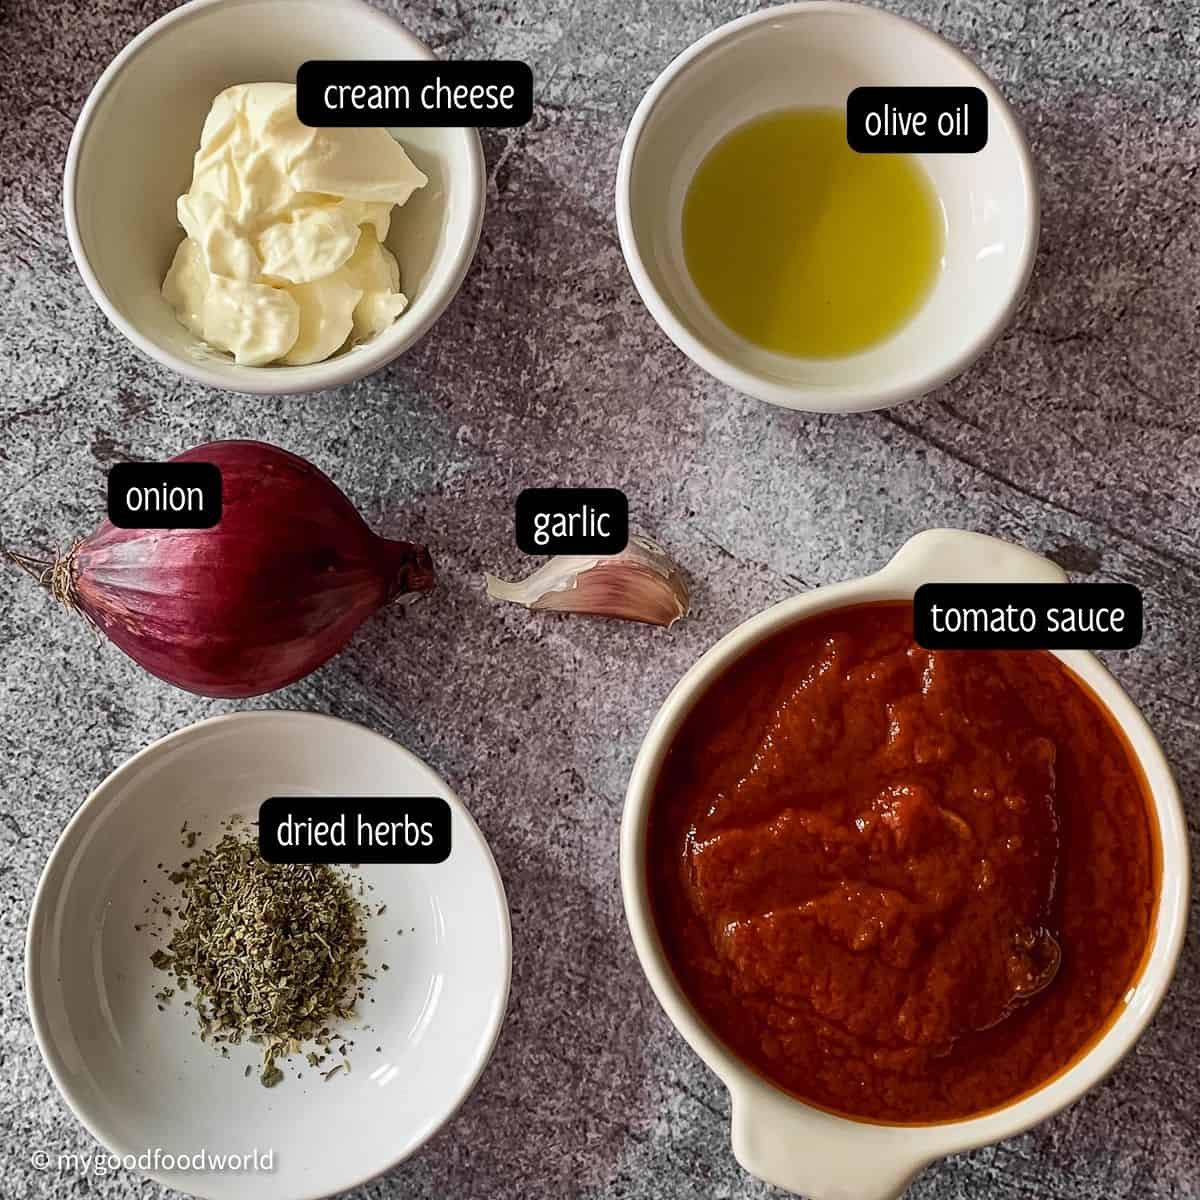 Ingredients for a sauce recipe such as cream cheese, olive oil, dried herbs, tomato sauce, and garlic are placed in bowls and on a grey background.